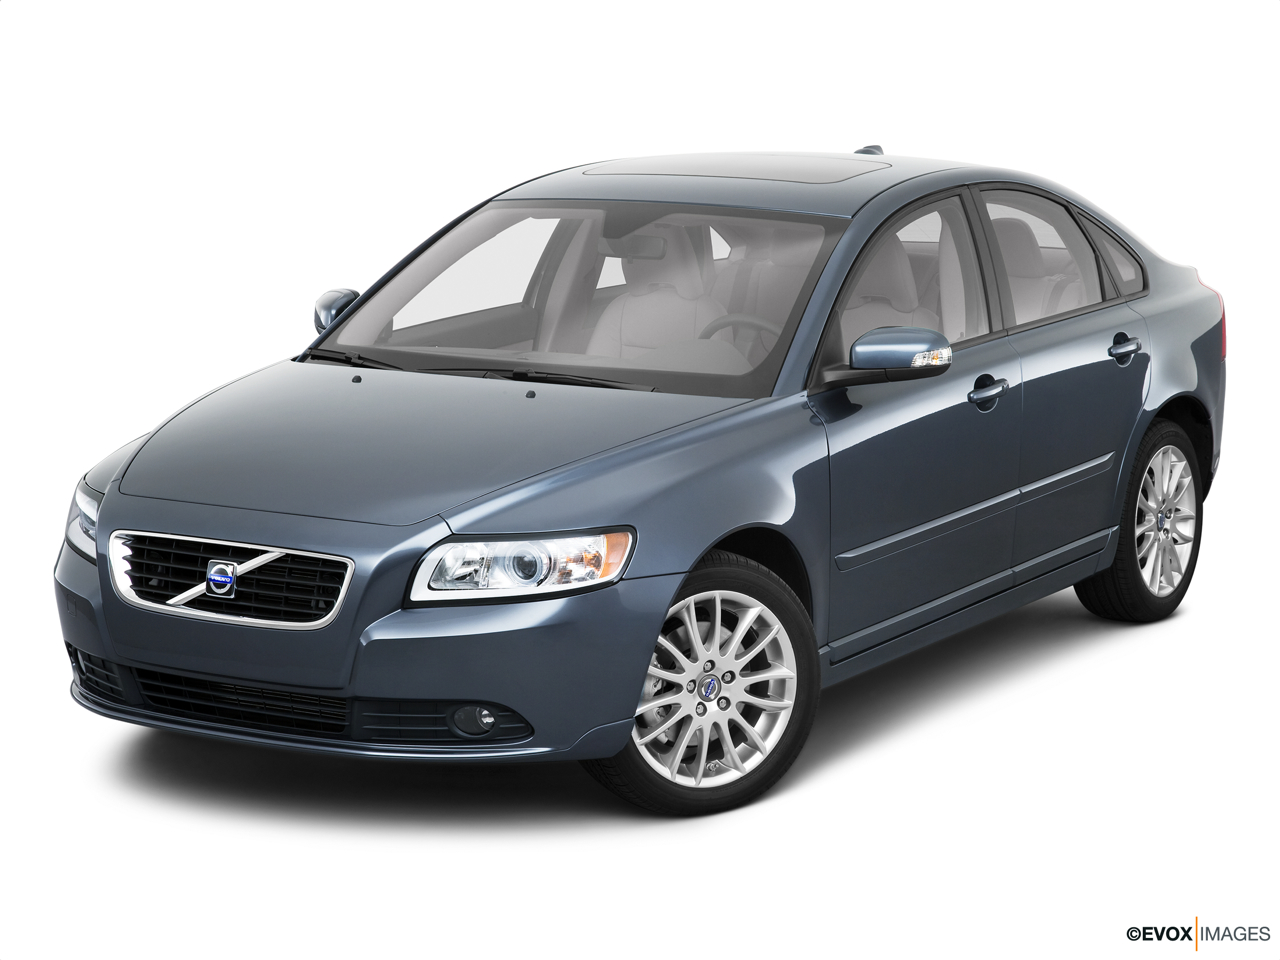 2010 Volvo S40 2.4i Front angle view. 